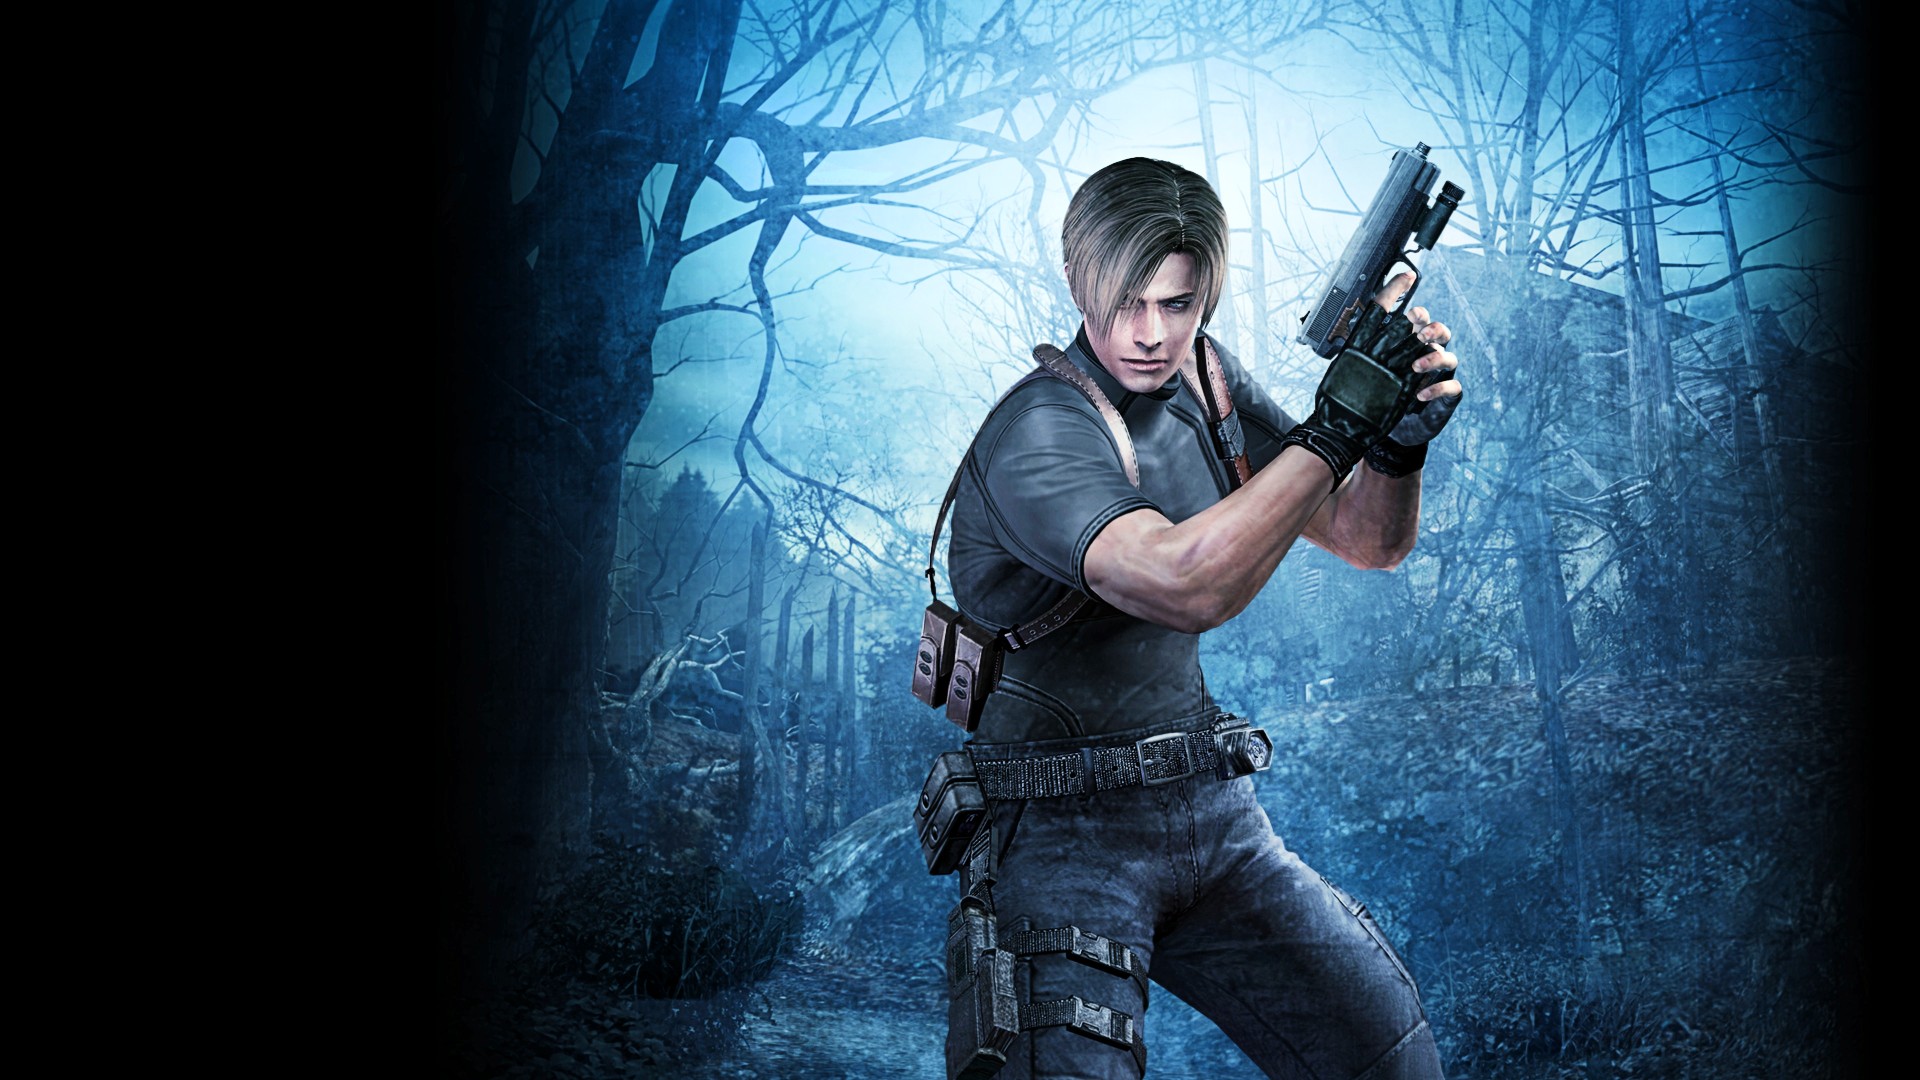 Steam resident evil 4 ultimate hd фото 58